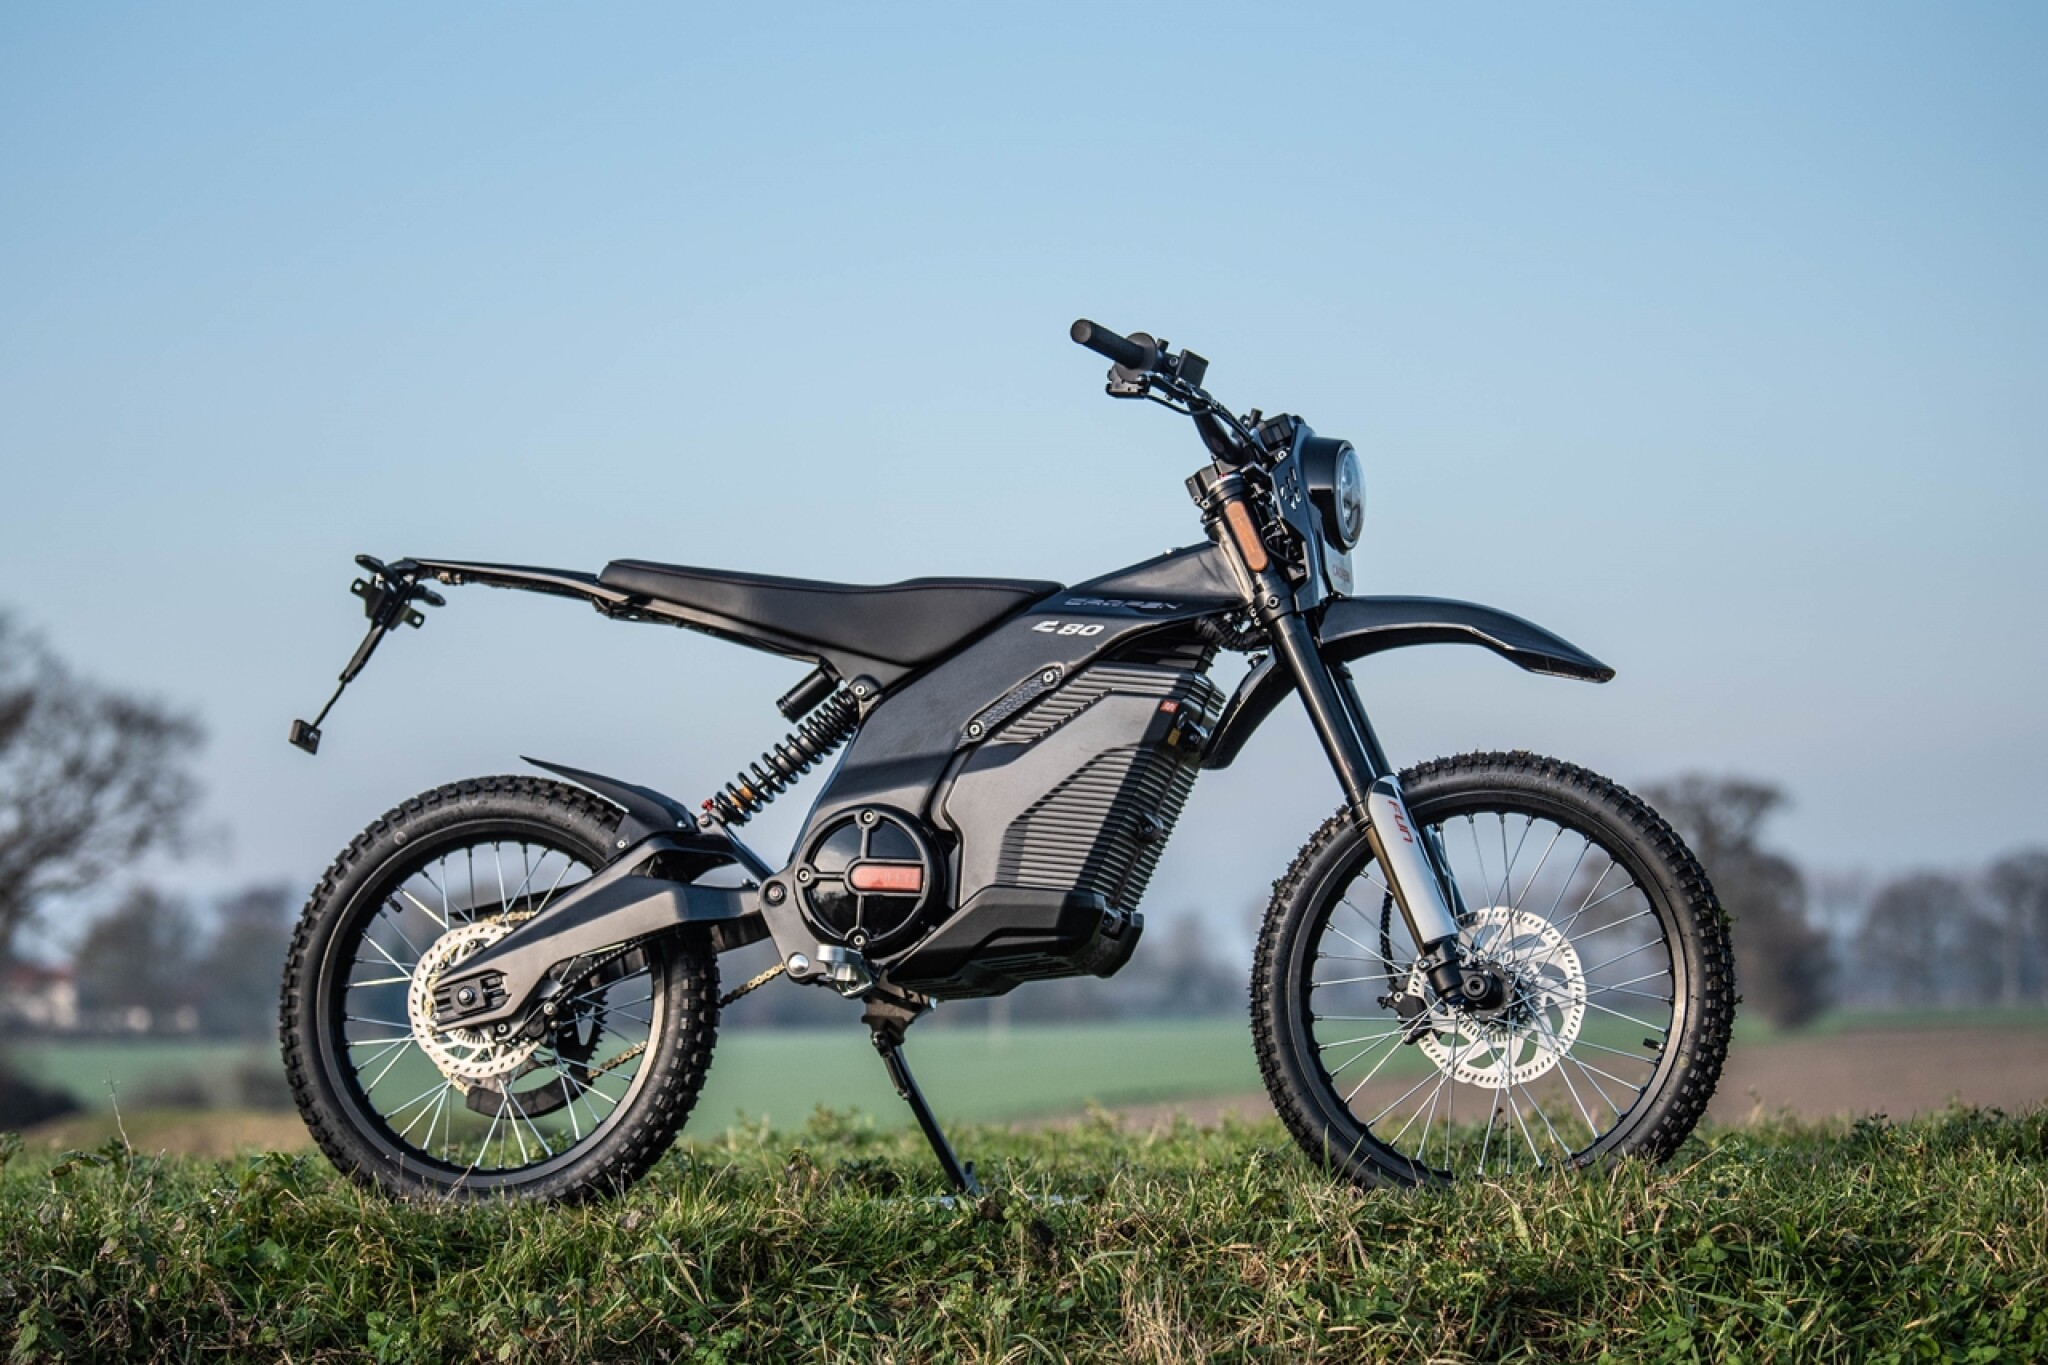 Caofen F80 Road Legal Electric Motorcycle.jpg